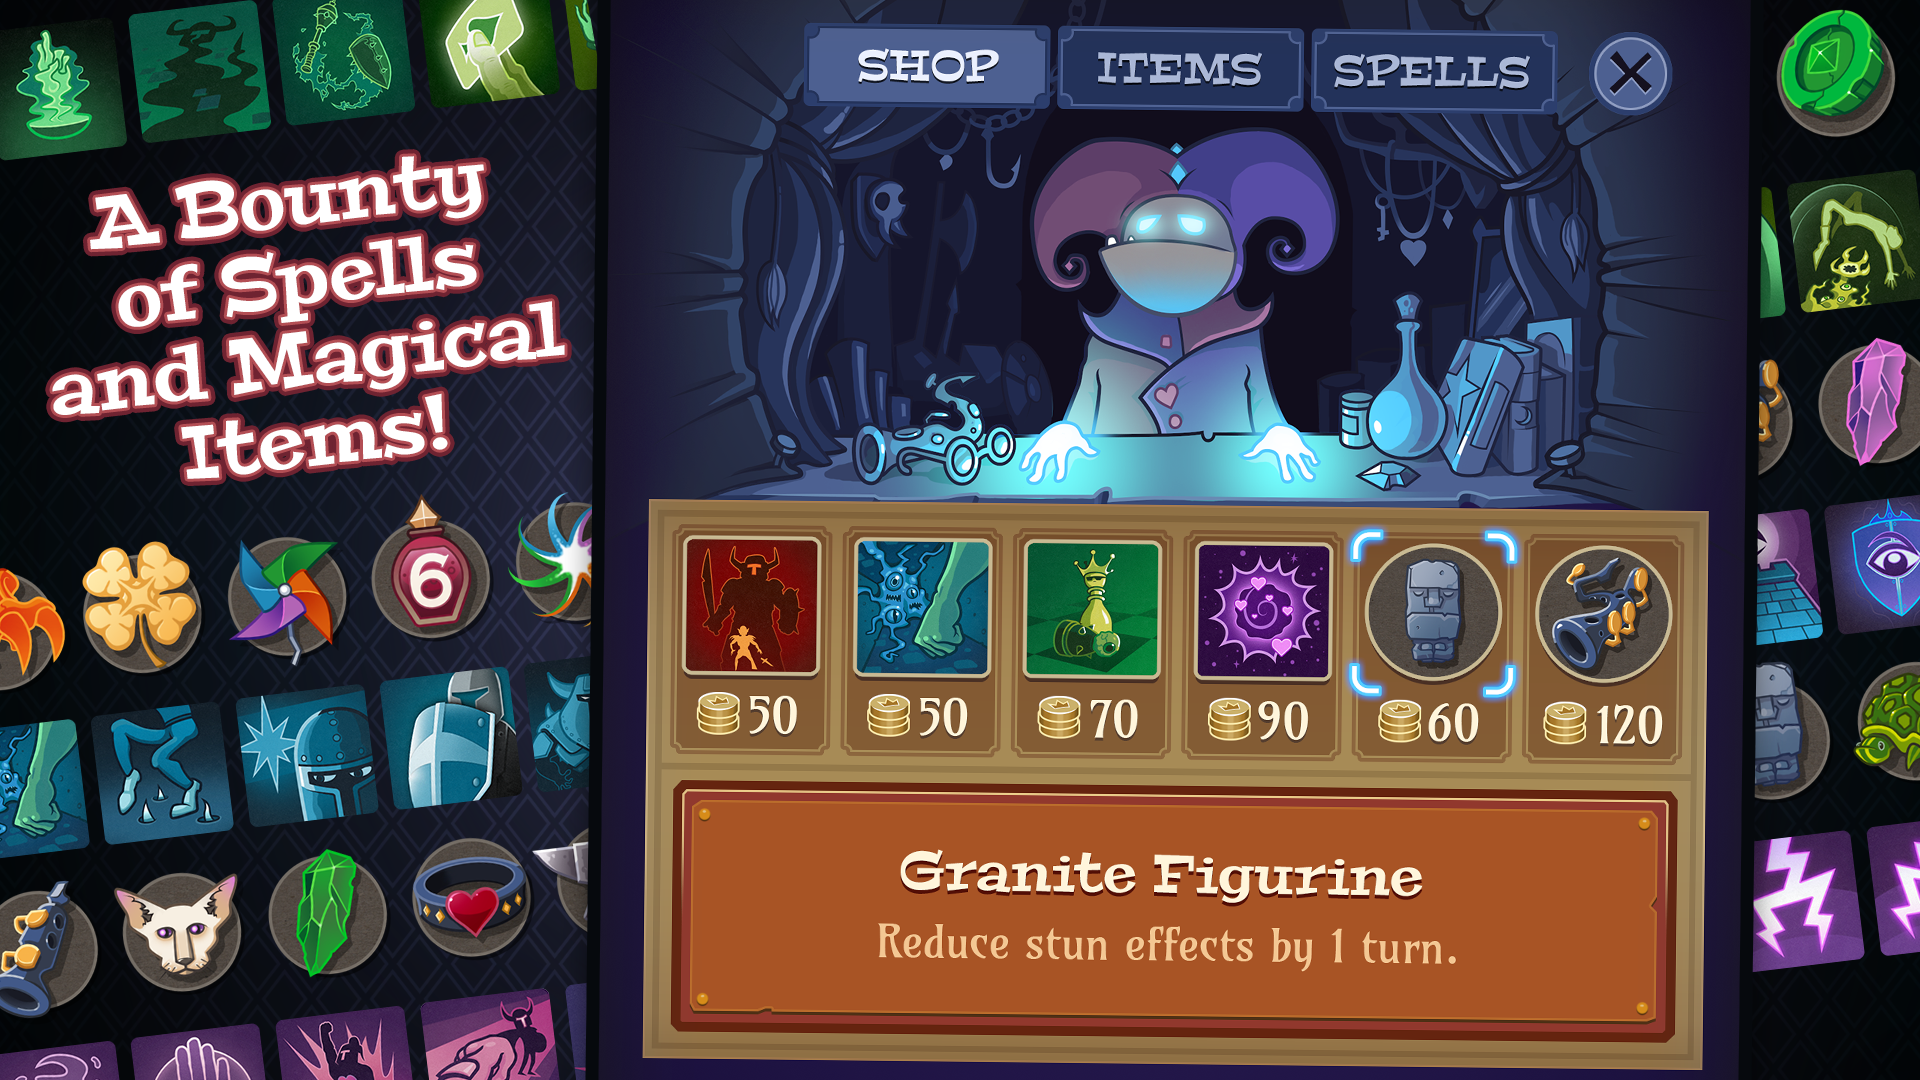 Shop for Spells and Items!